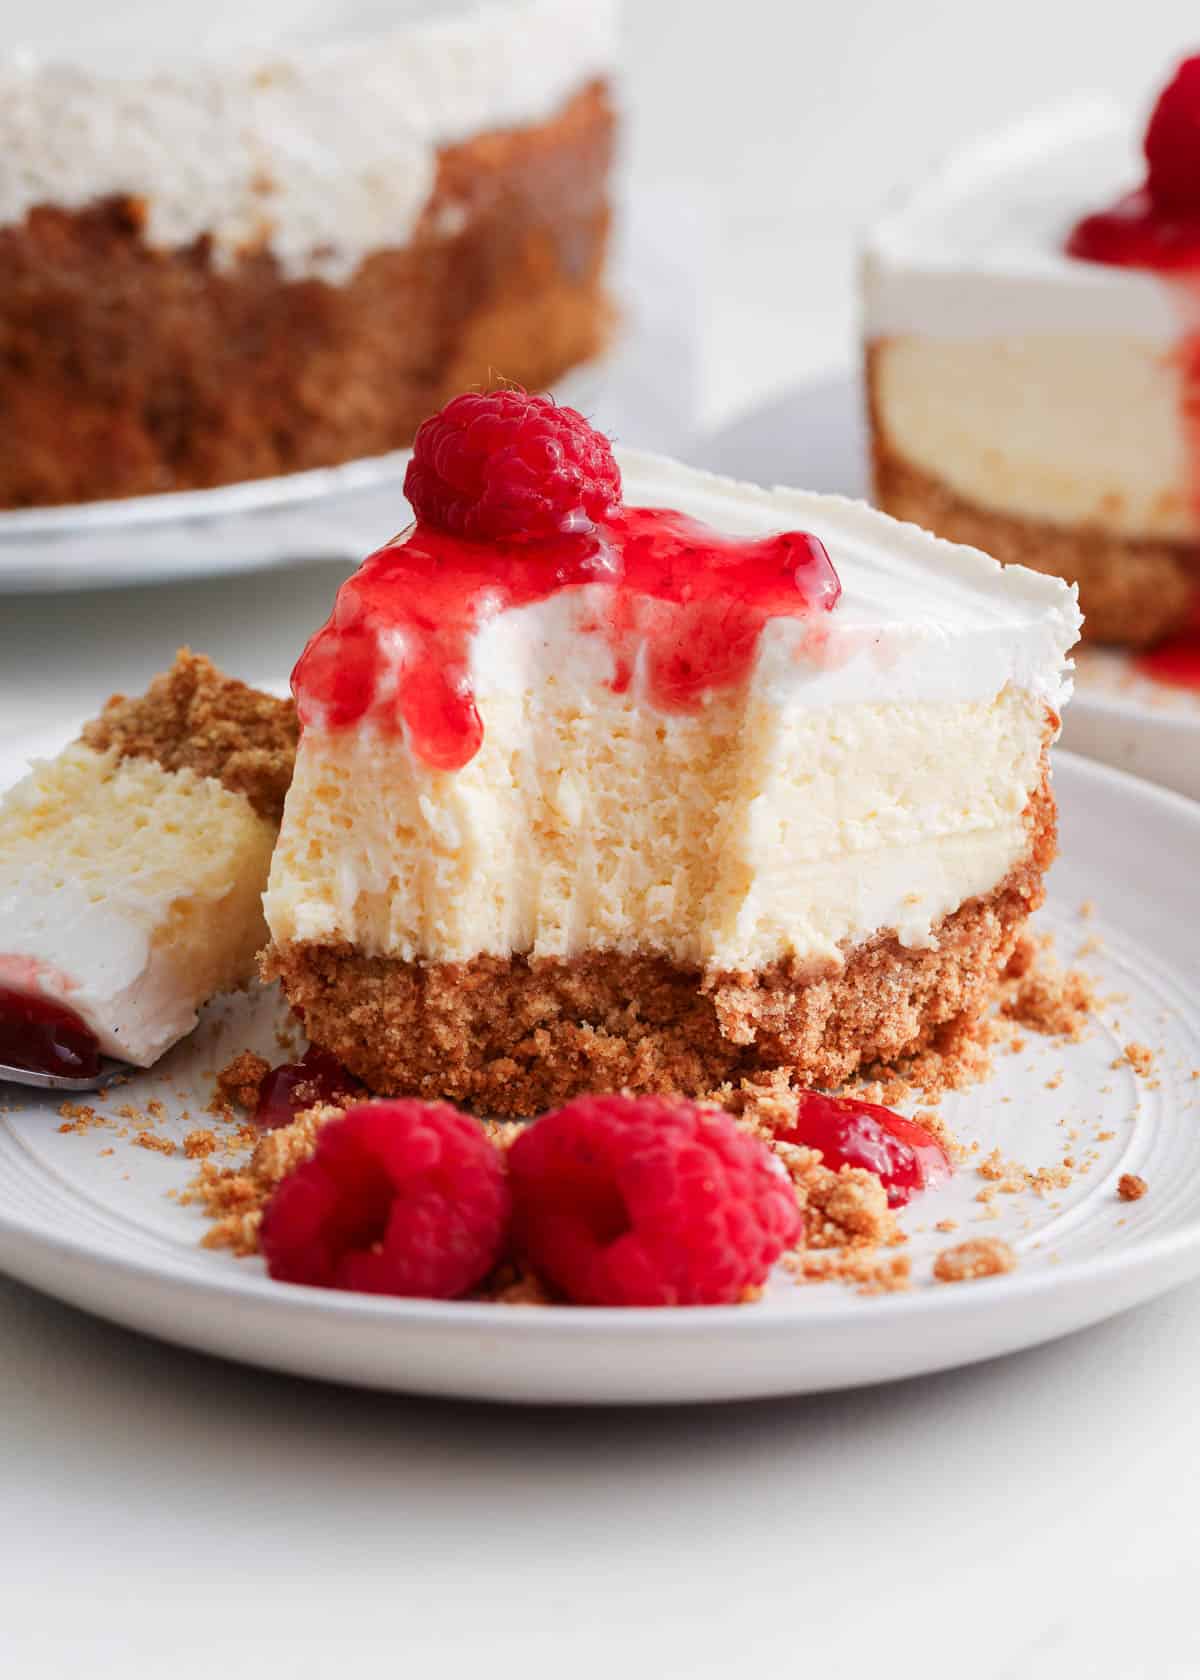 Slice of cheesecake with raspberry sauce on top.